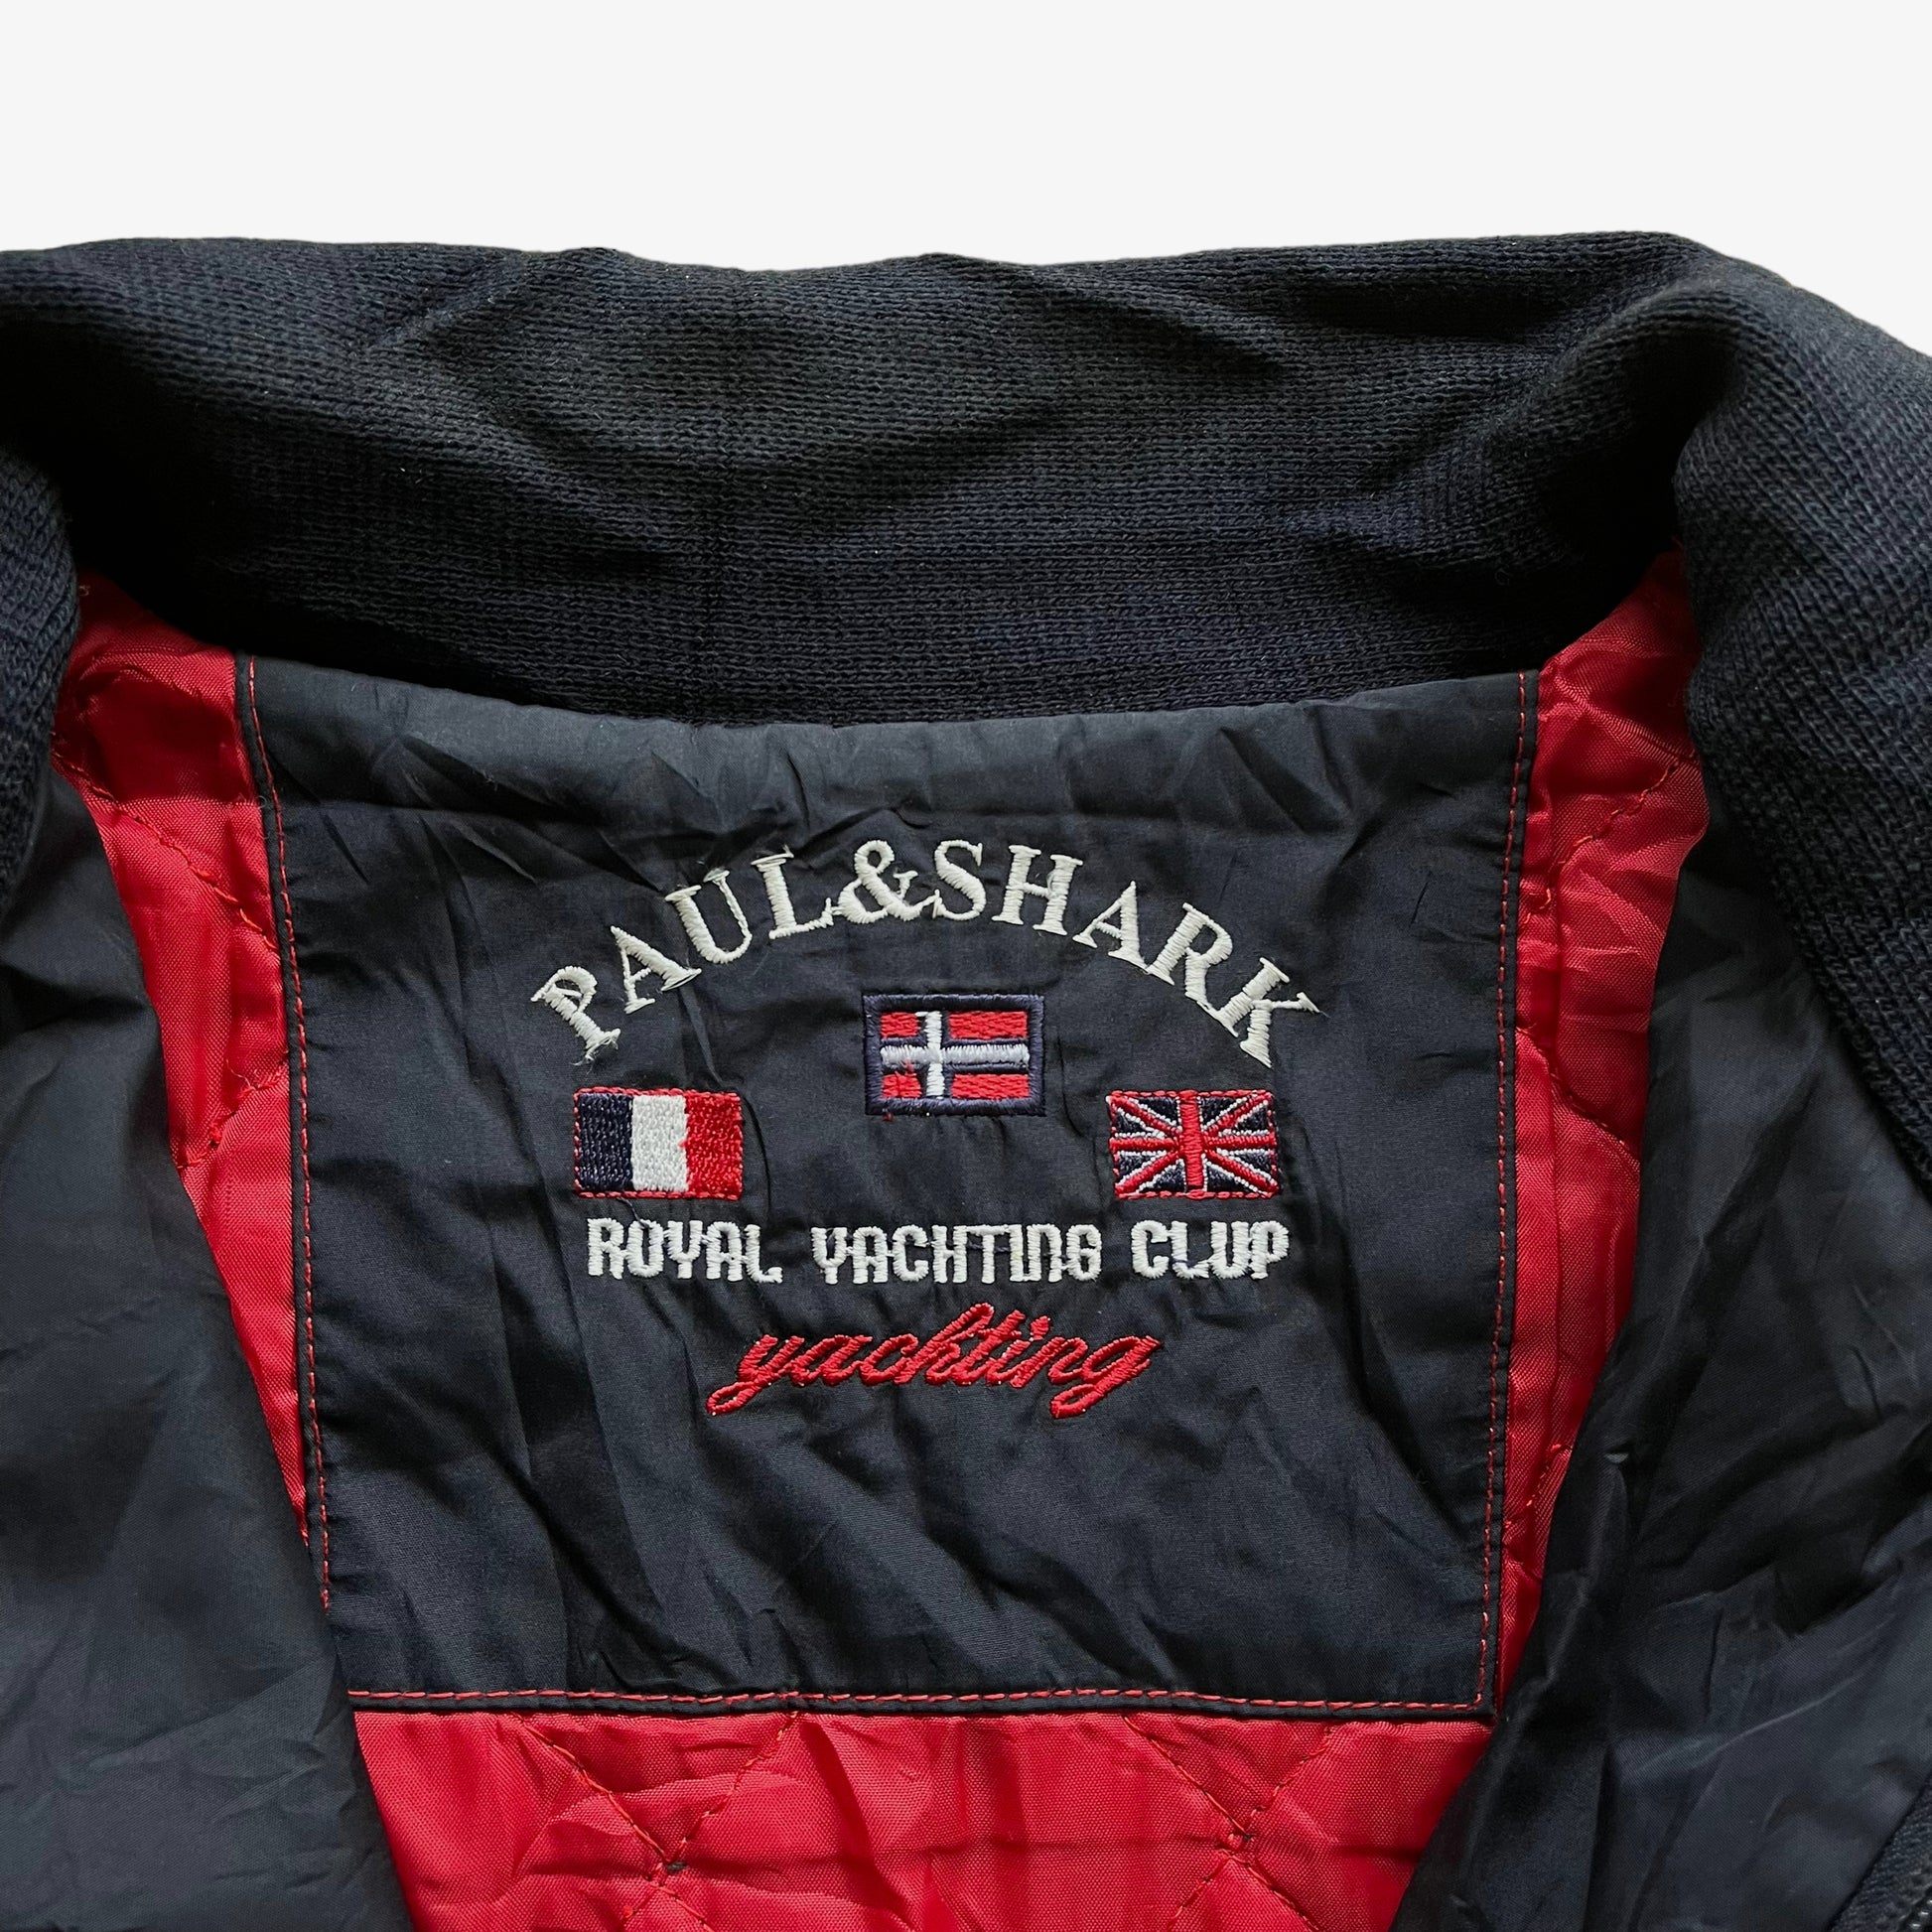 Vintage 90s Paul And Shark Royal Yachting Club Wool Jacket Label - Casspios Dream